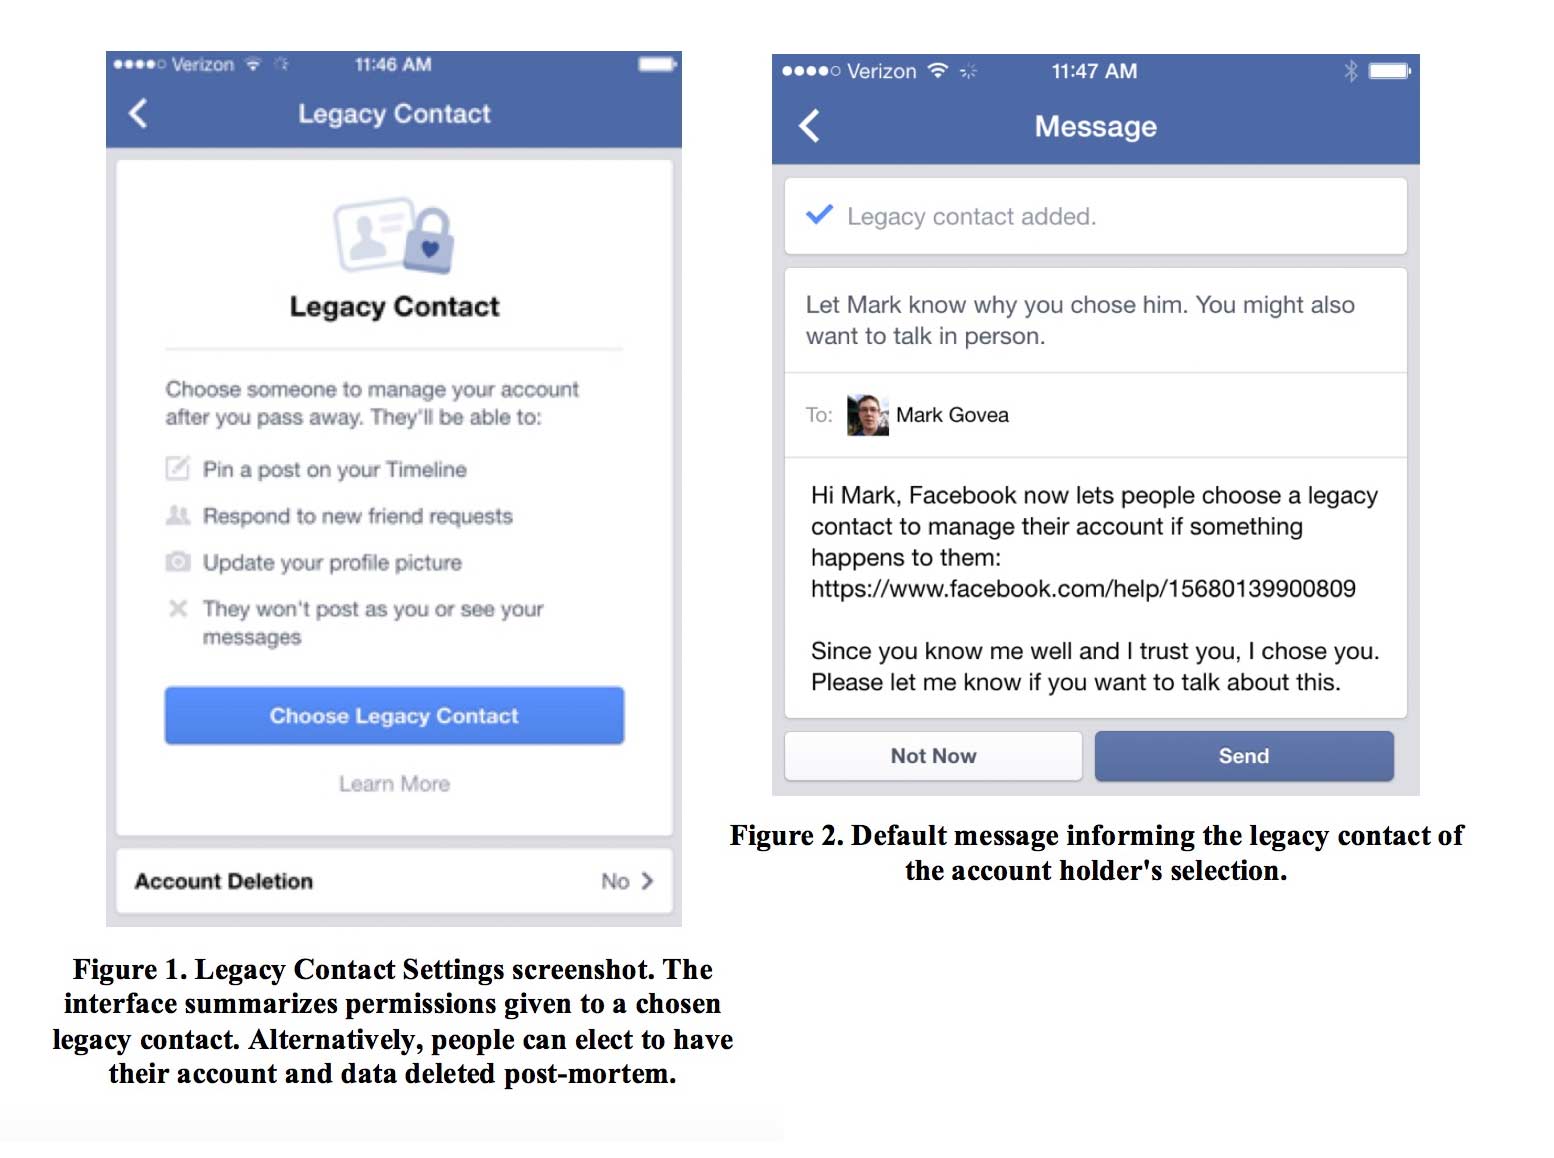 Facebook Research contemplates the user experience for dead users.